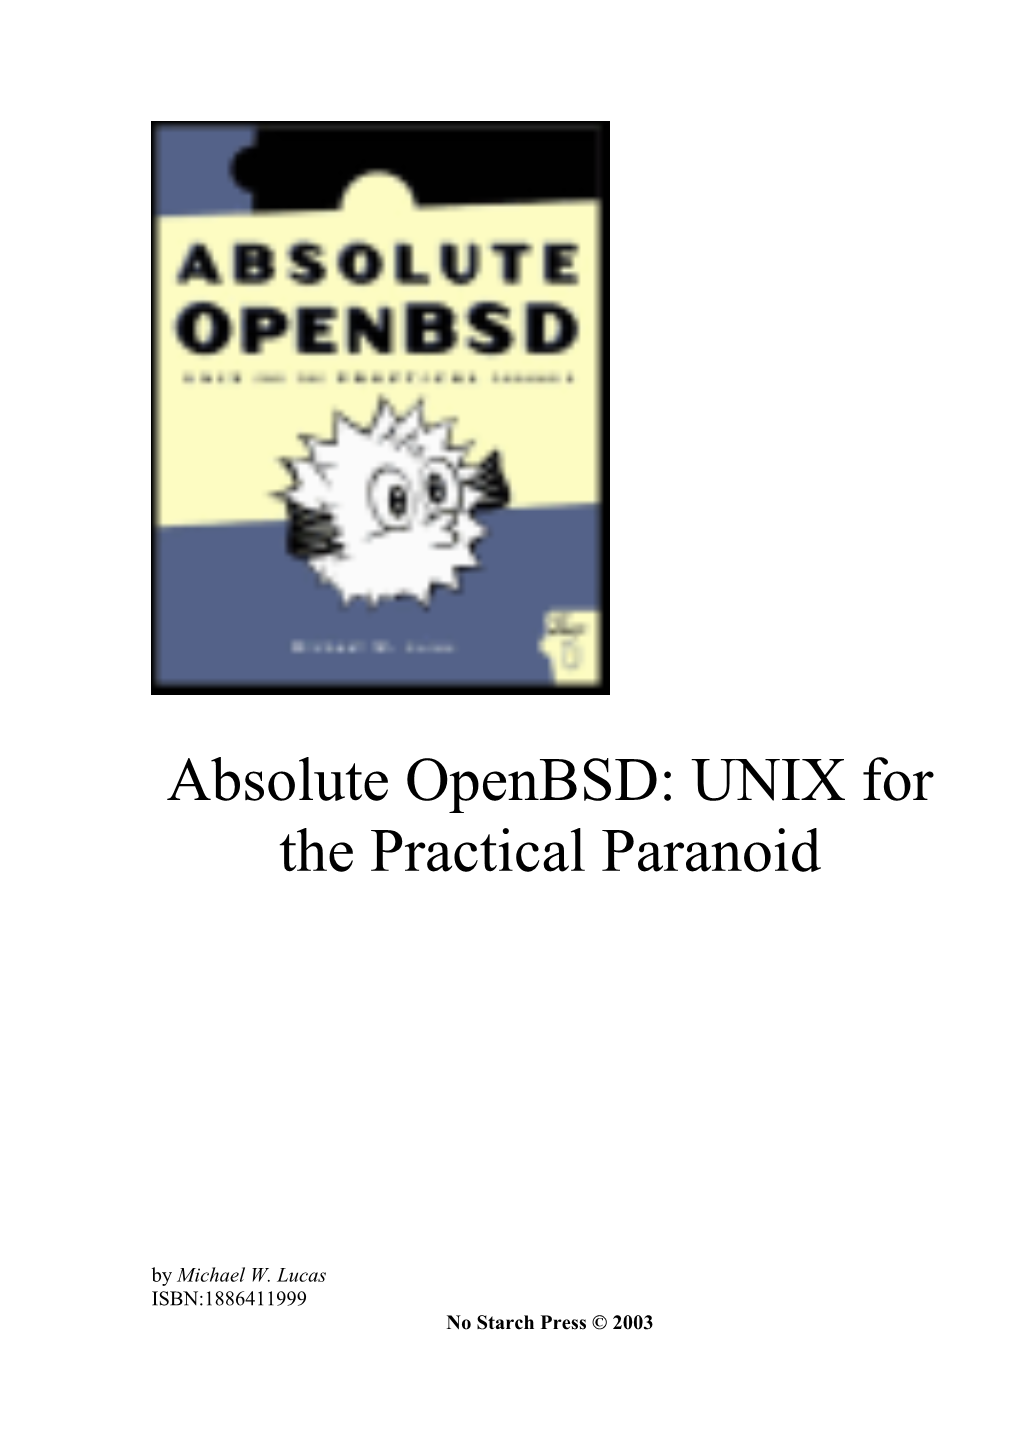 Absolute Openbsd: UNIX for the Practical Paranoid